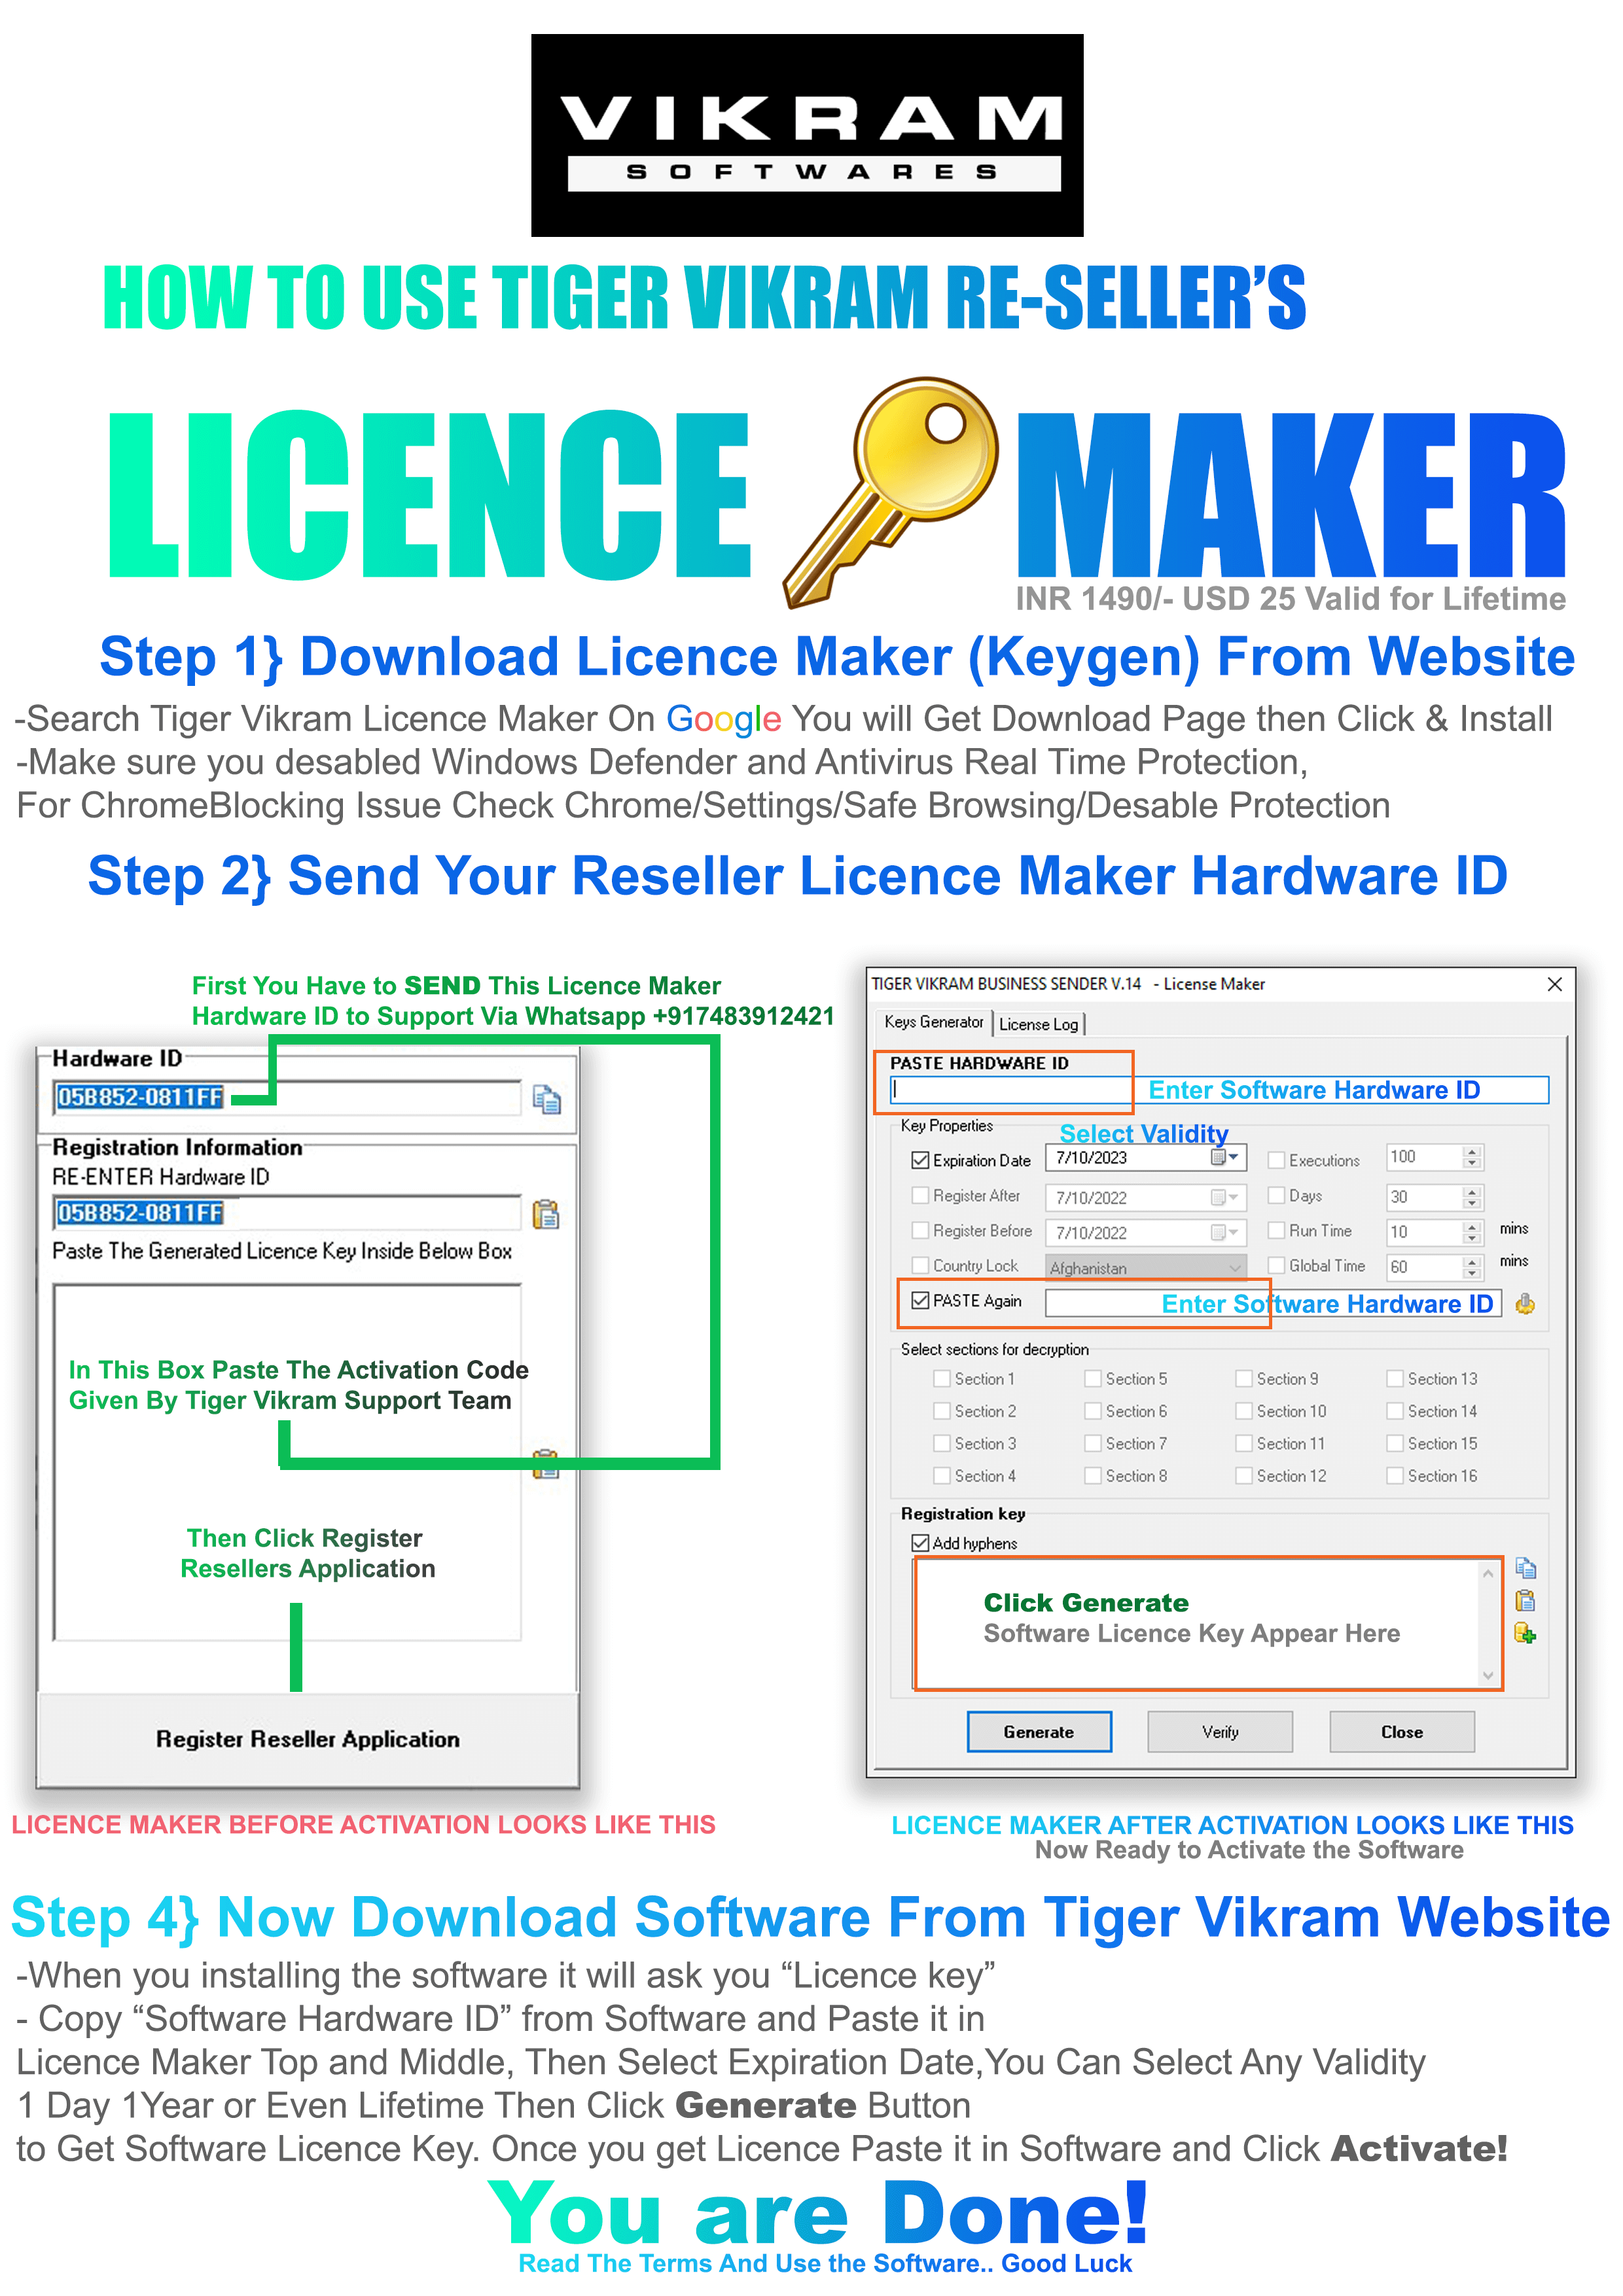 HOW TO USE LICENCE MAKER